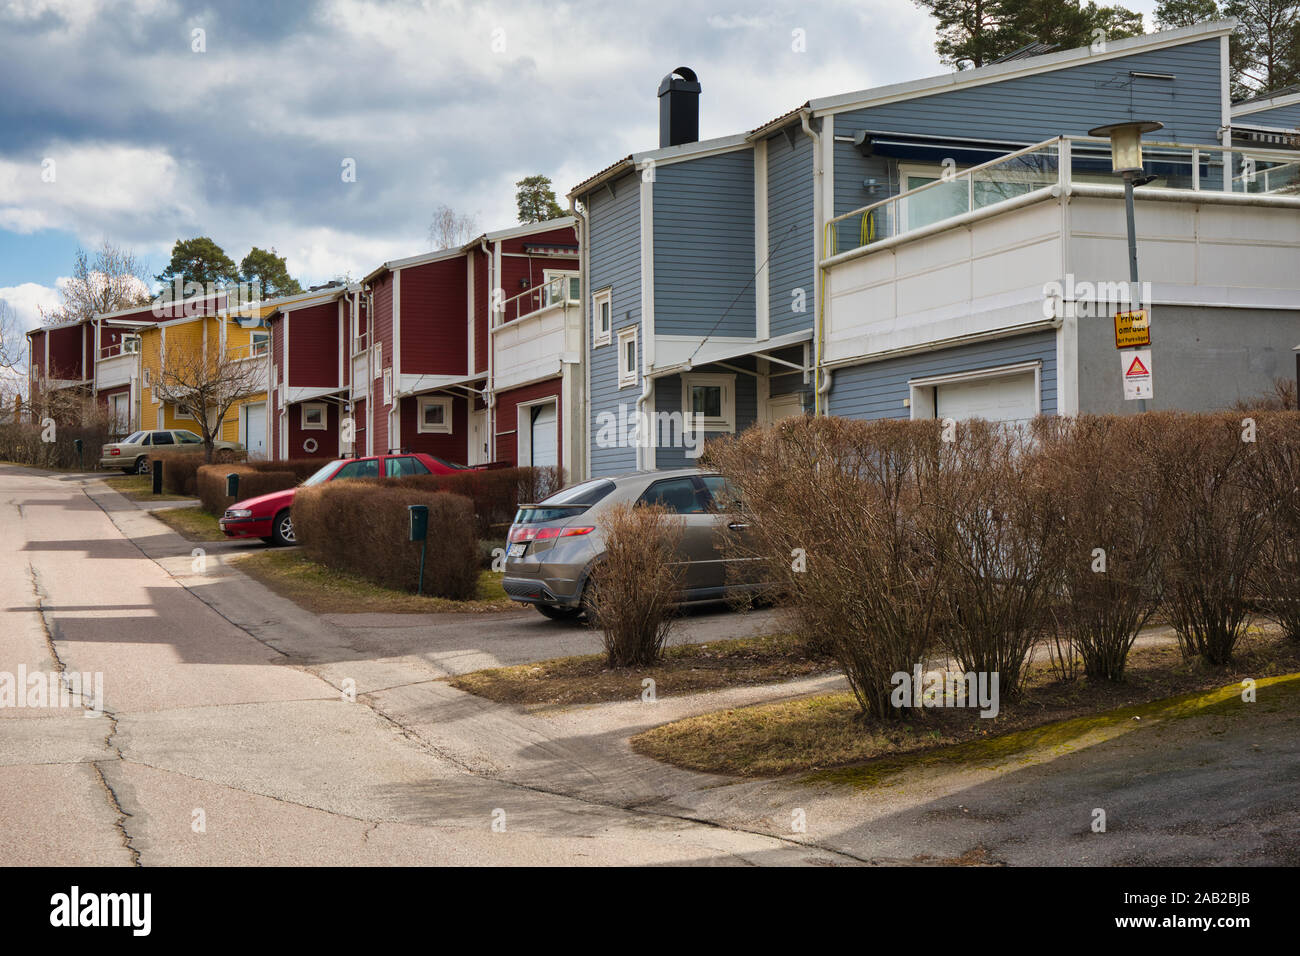 Street of typical suburban Swedish houses in the Stockholm suburb of Upplands Vasby, Stockholm, Sweden Stock Photo